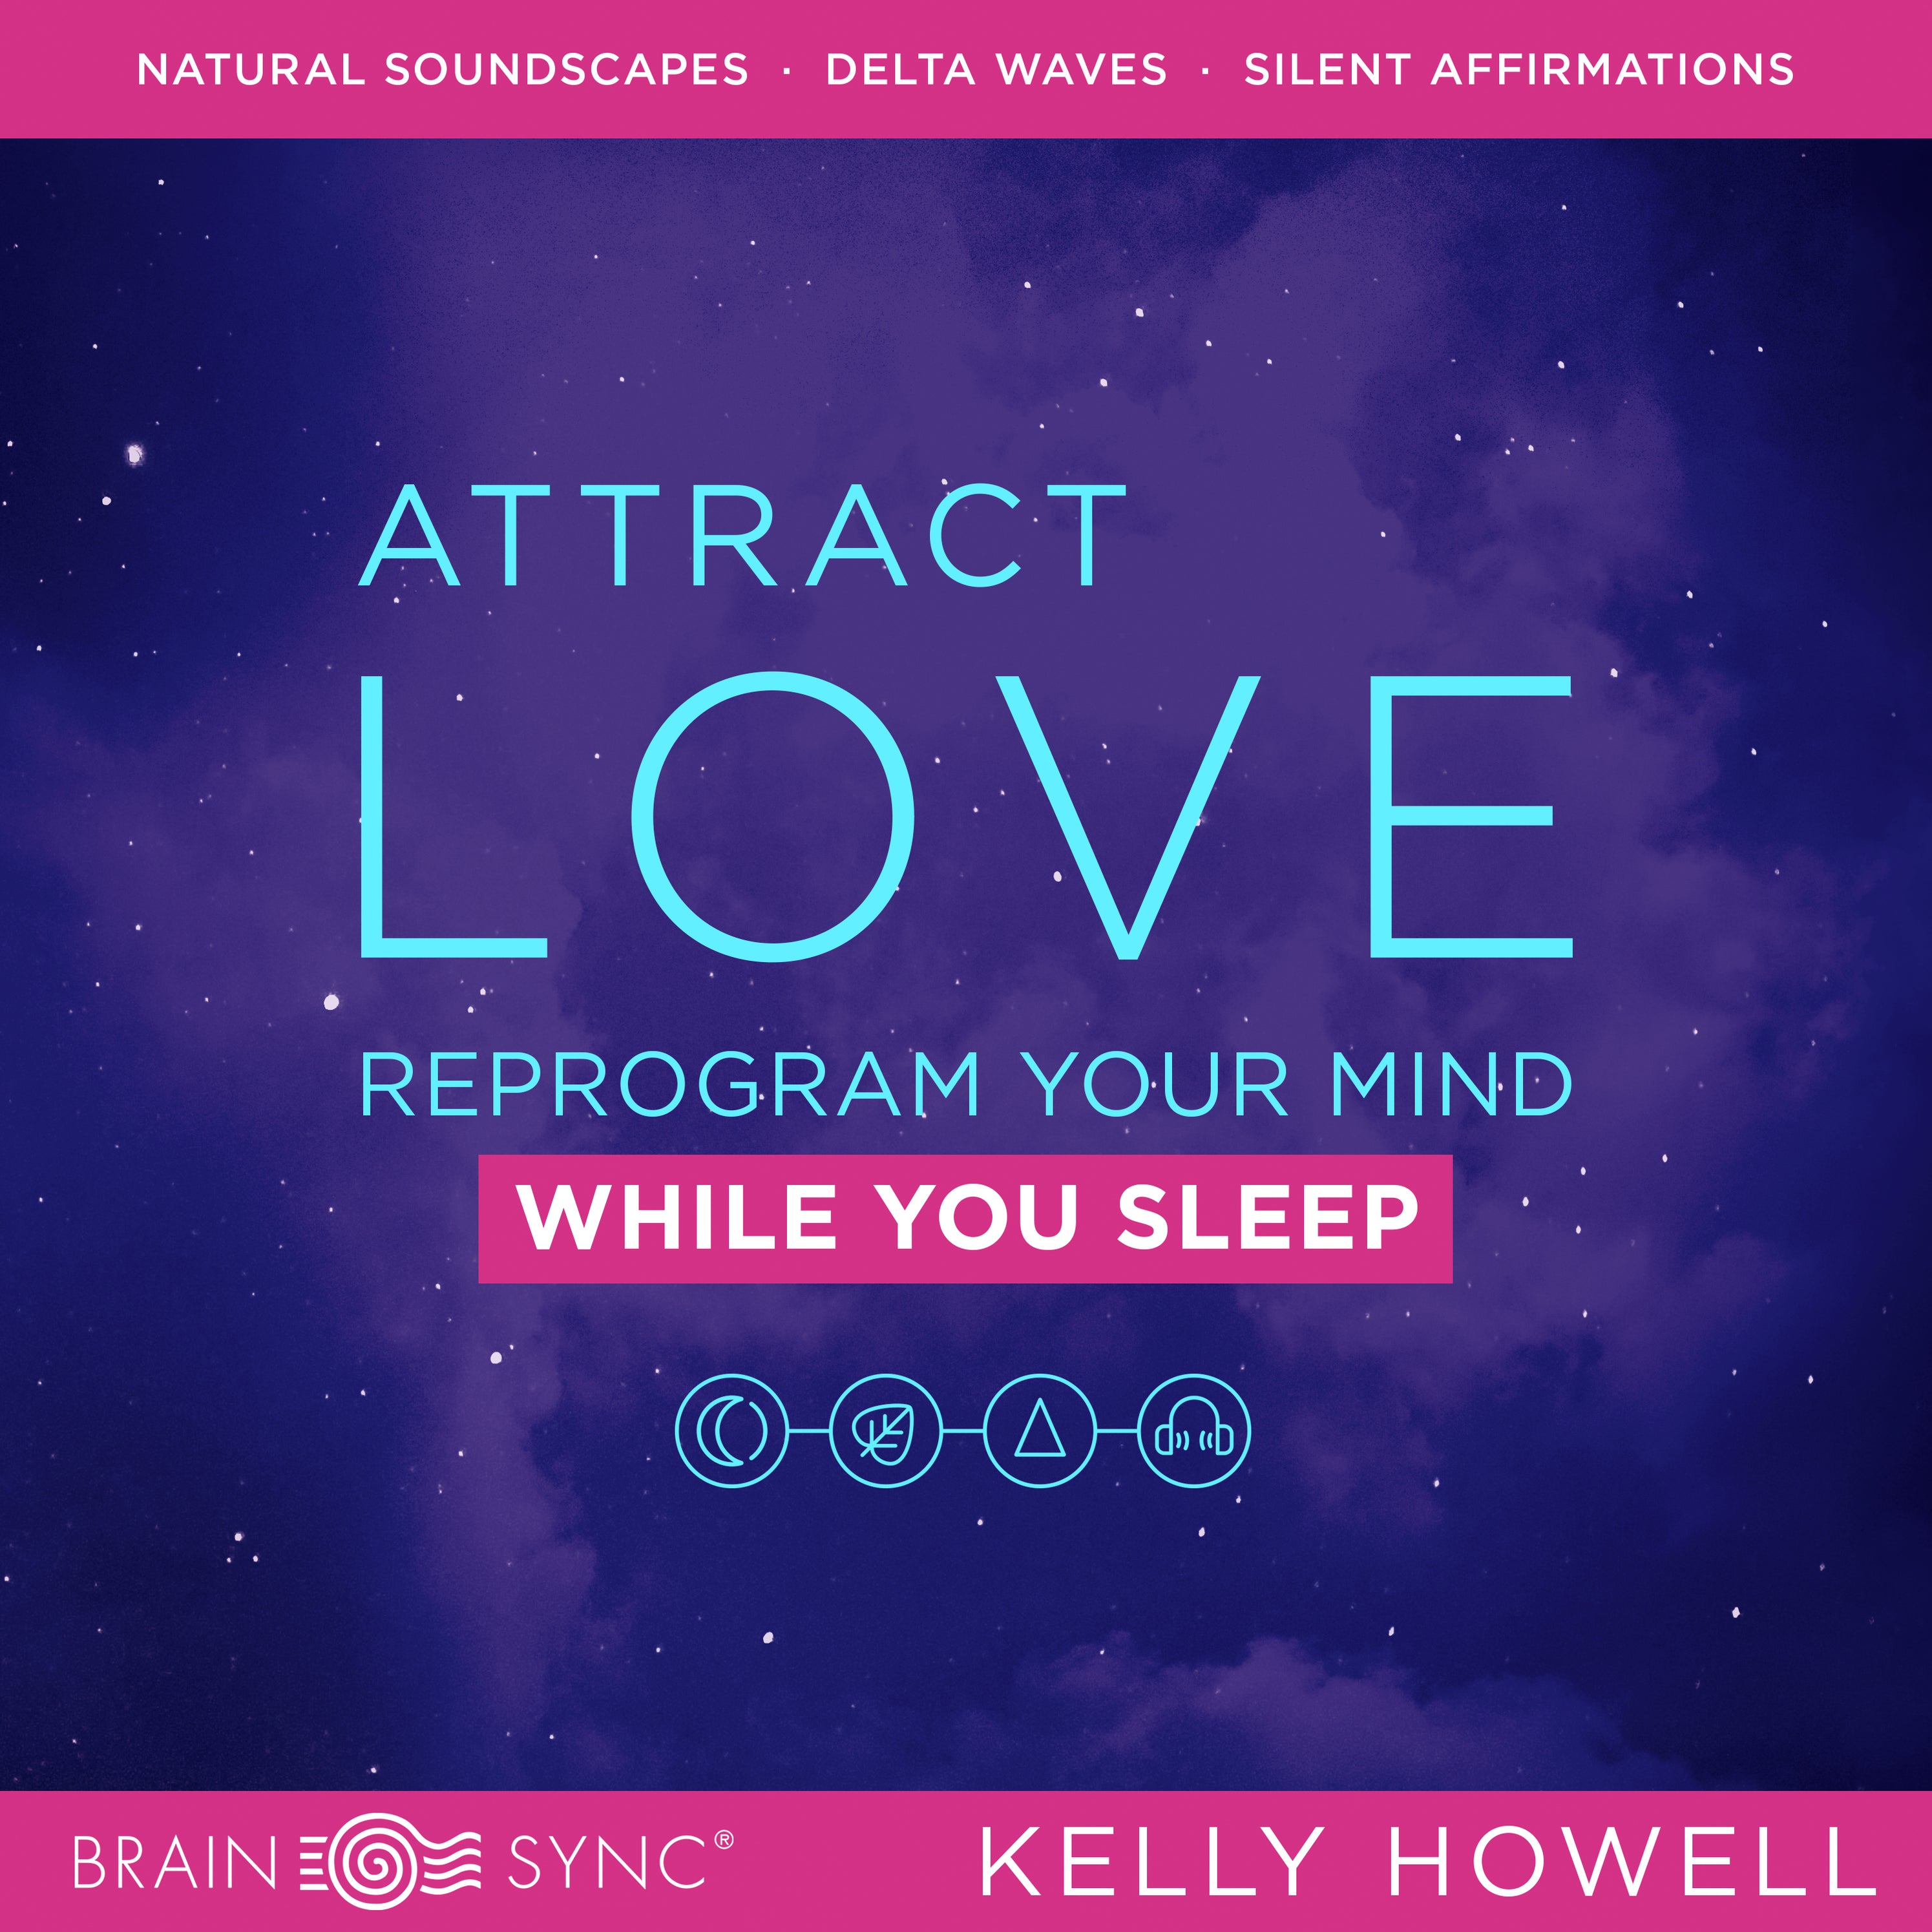 Attract Love Meditation | Subliminal Messages To Attract Love – Brain Sync